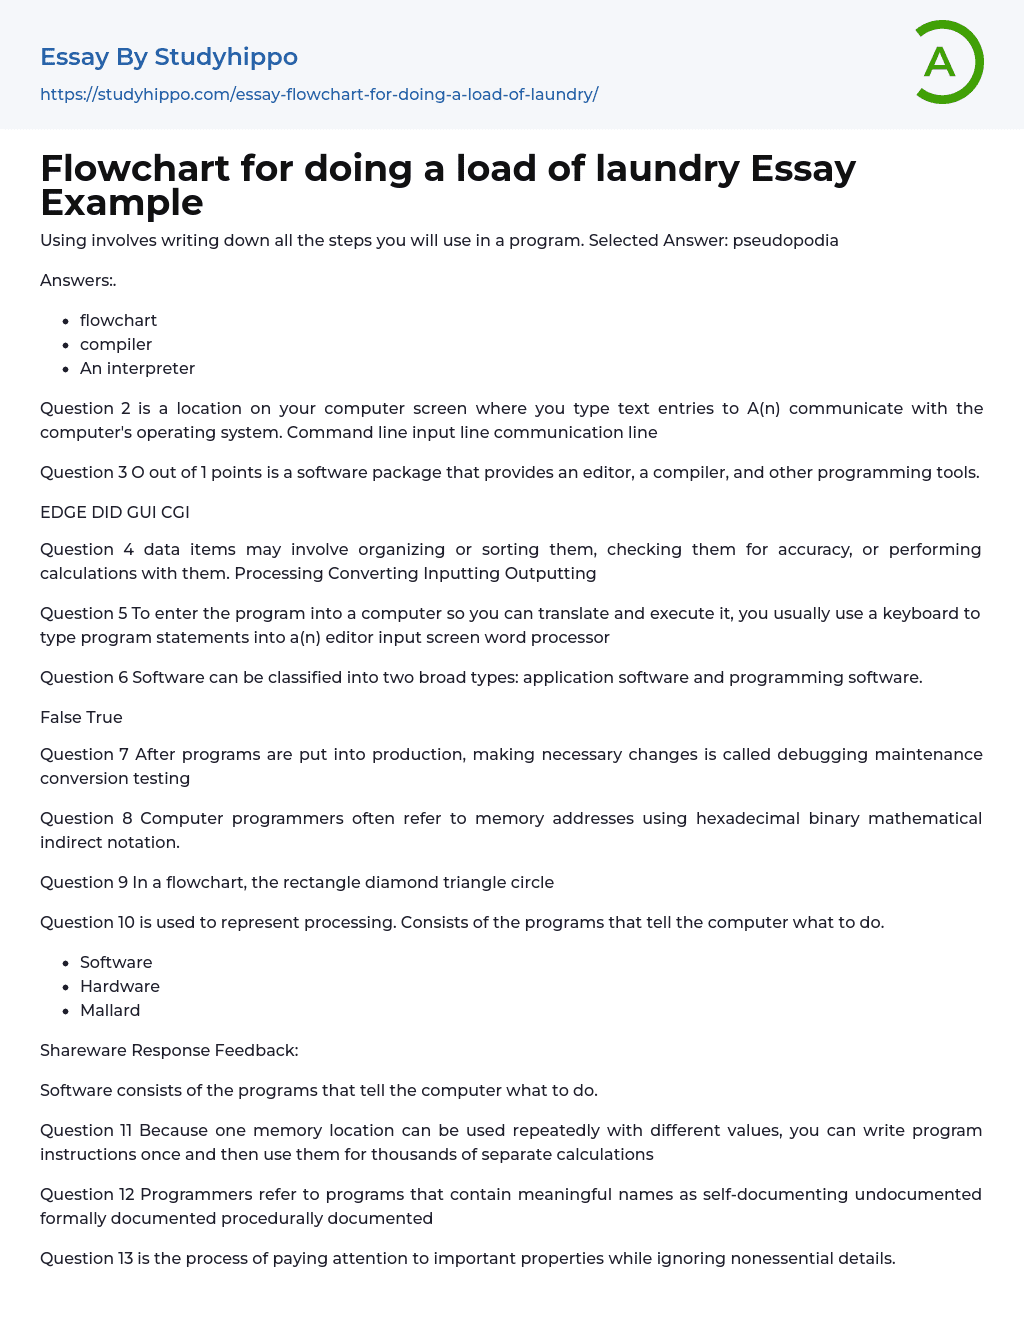 Flowchart for doing a load of laundry Essay Example